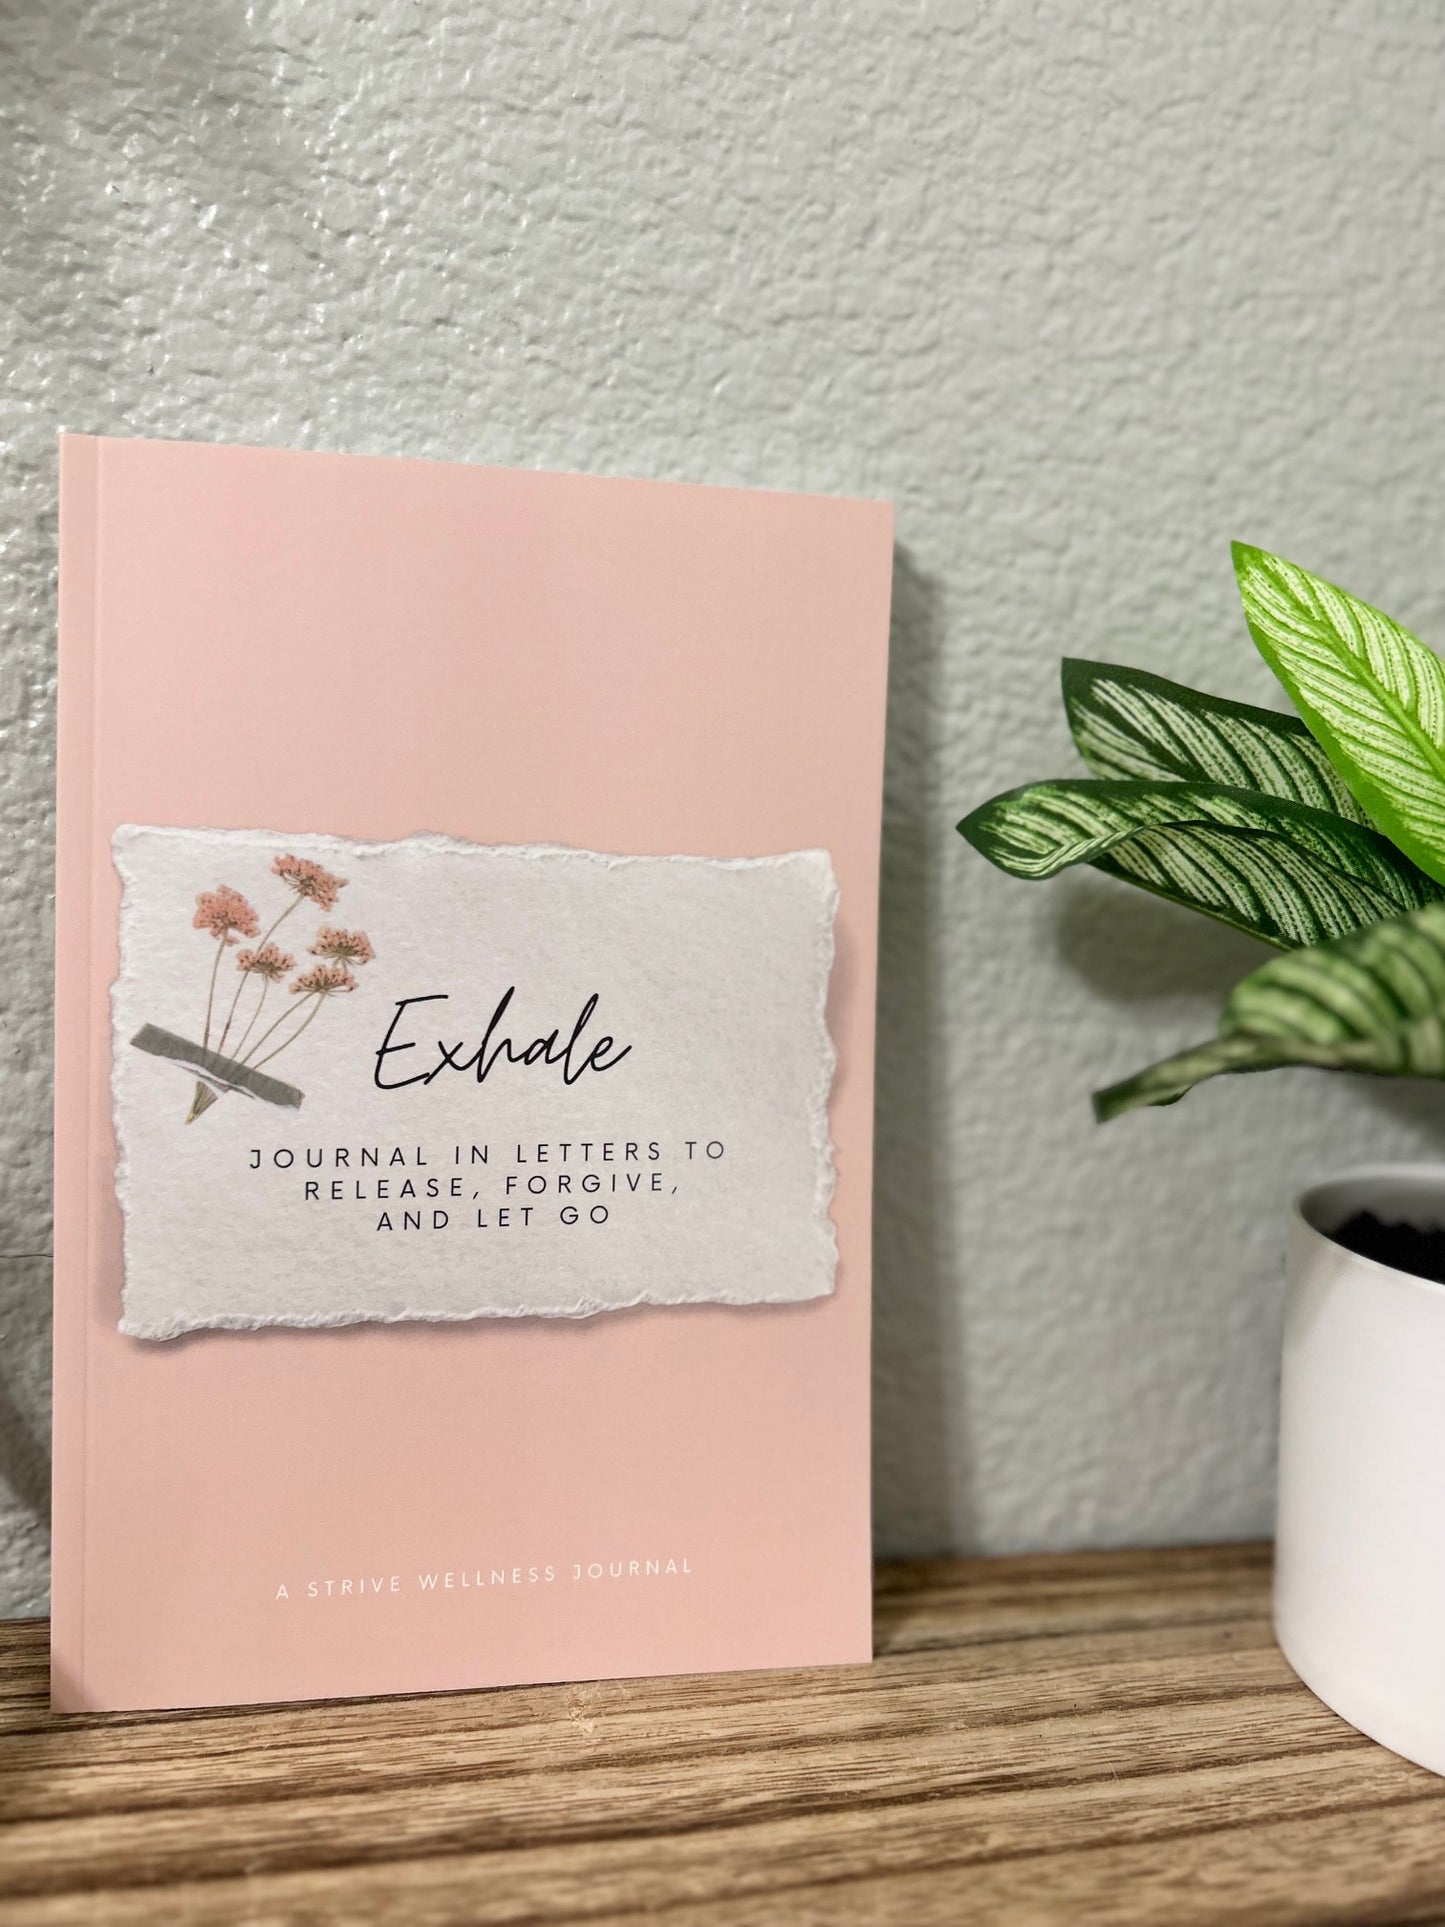 Exhale: Journal in Letters to Release, Forgive, and Let Go